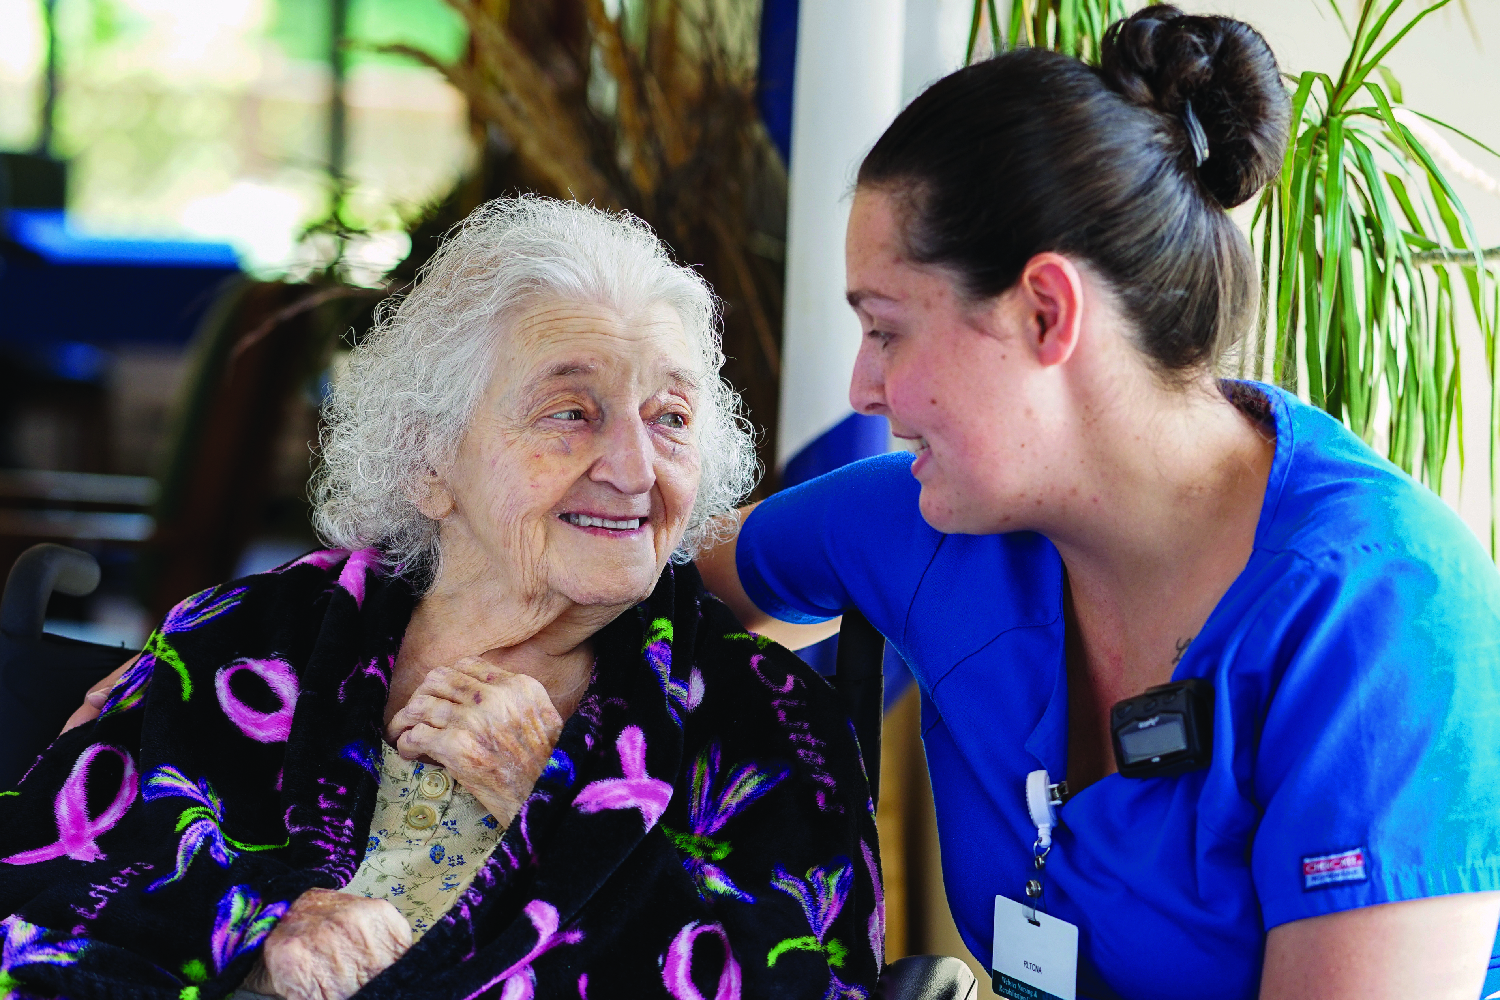 Our mission is caring for those who may not be able to fully care for themselves. 